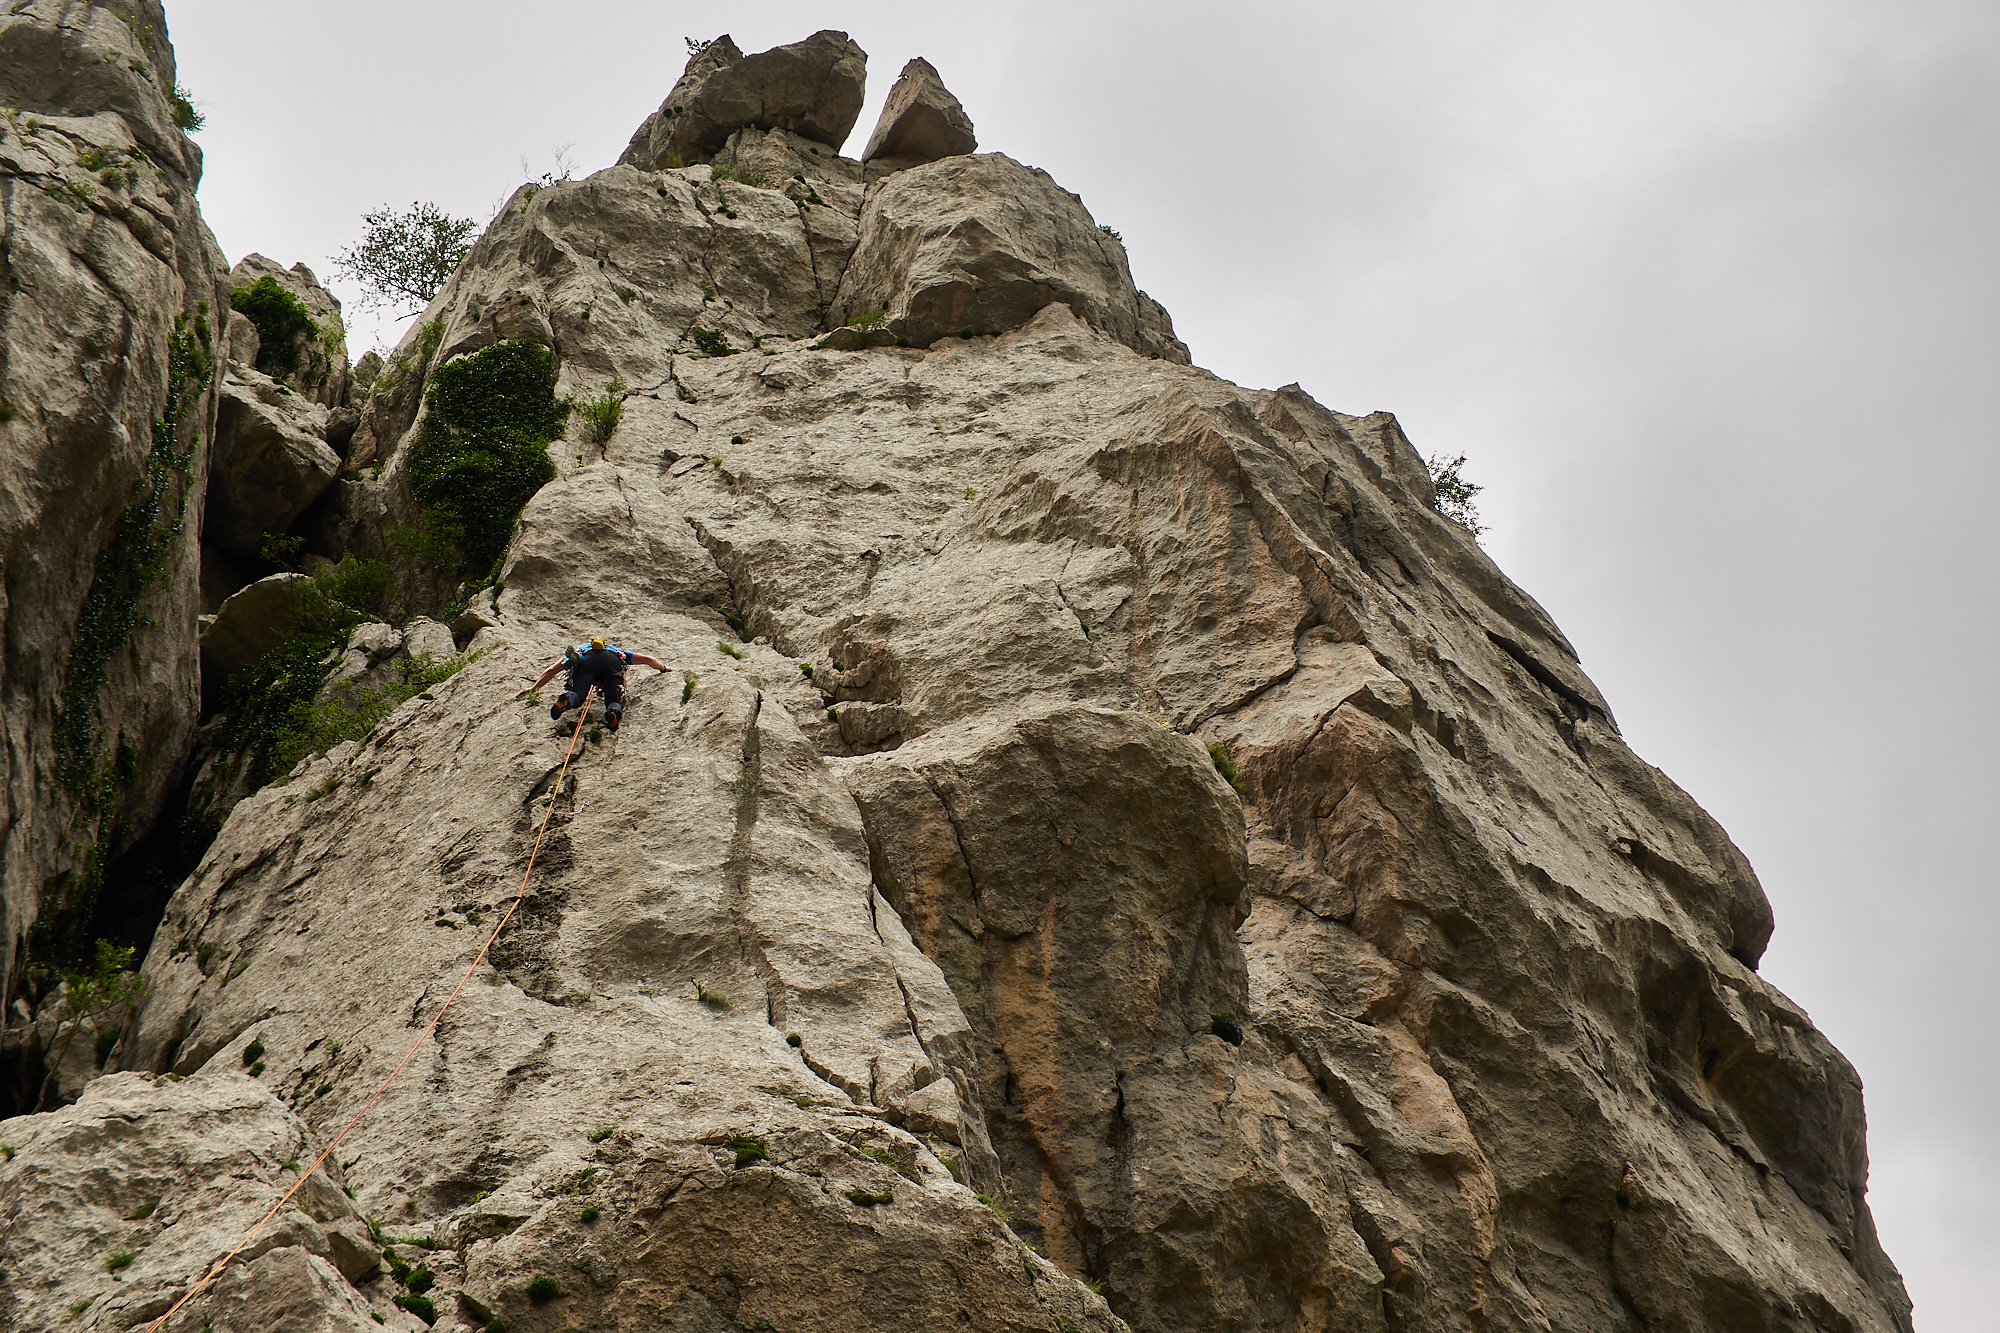 A climber on a limestone sport climb with trees and grey sky behind in the Paklenica gorge in Croatia